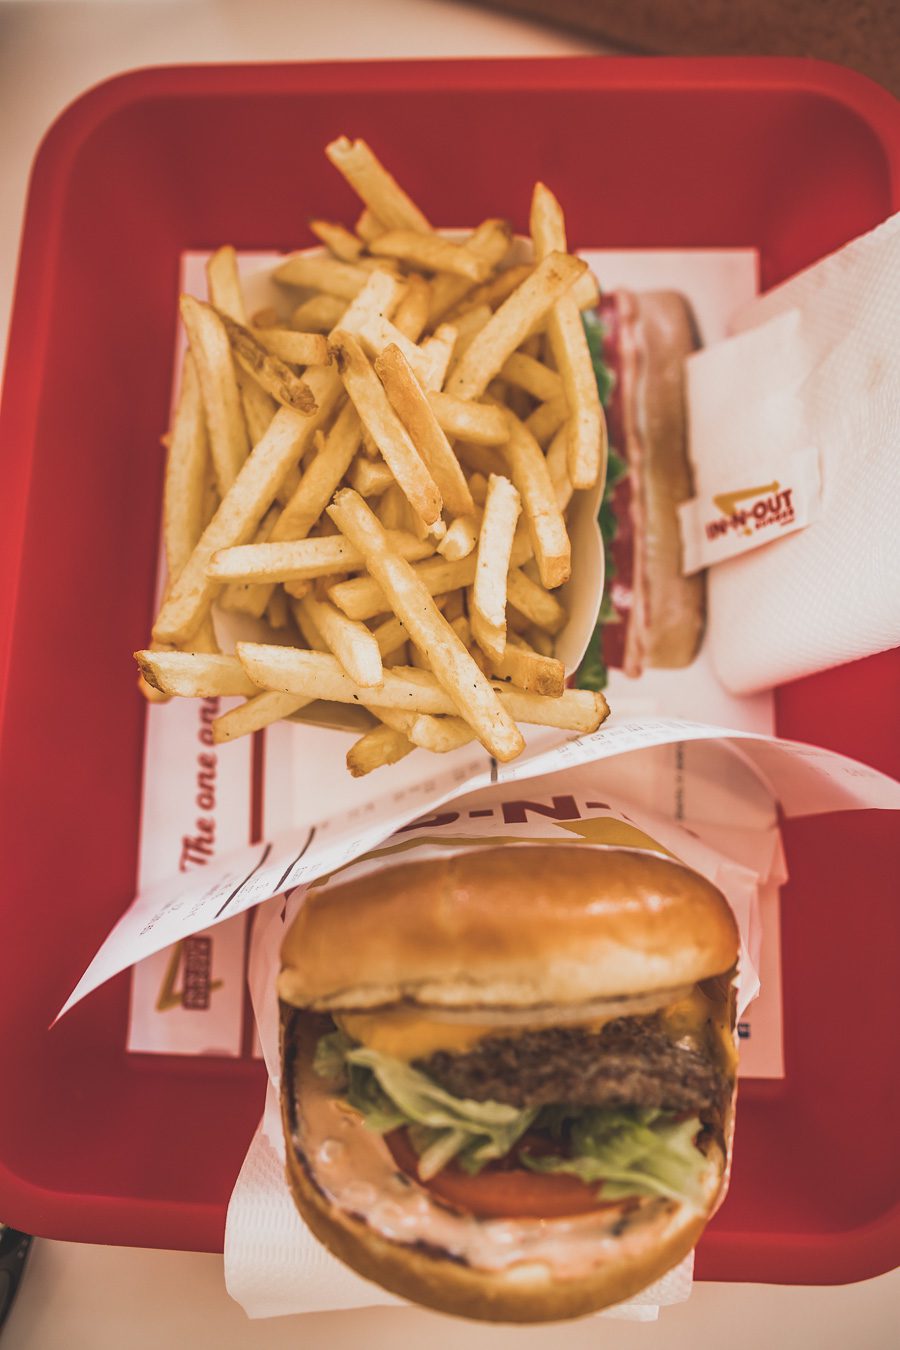 In-n-out burgers